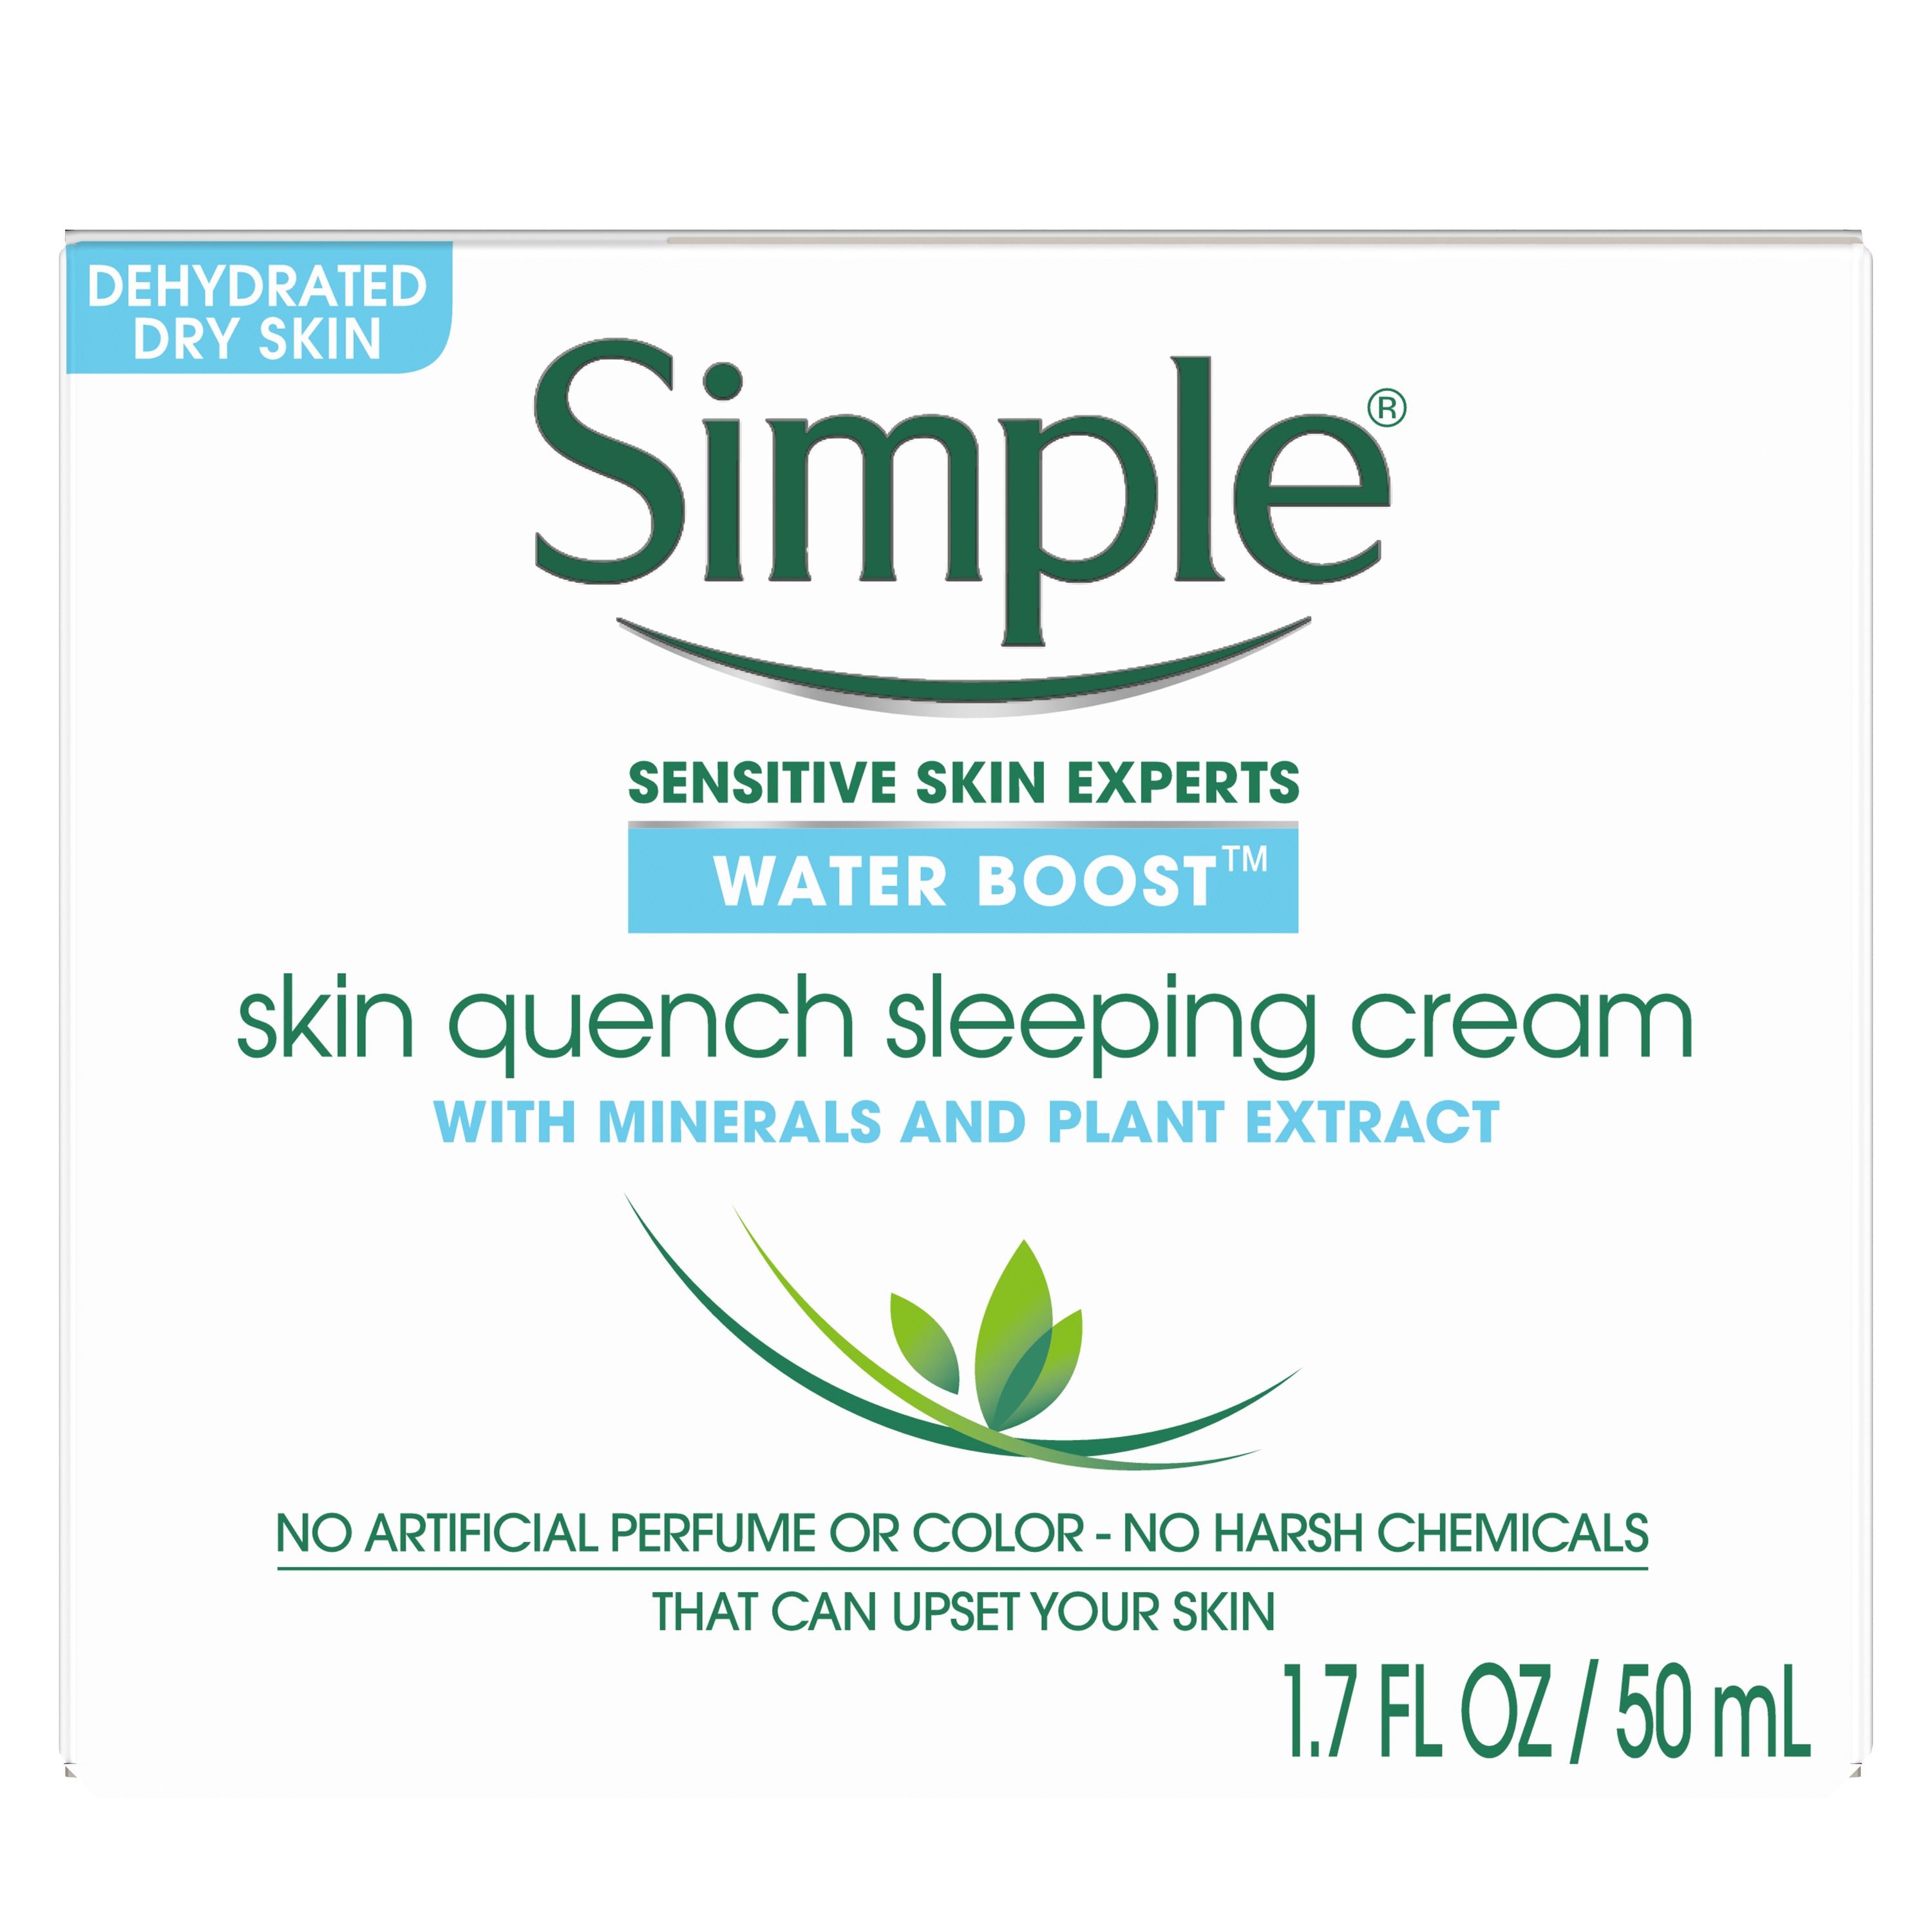 Simple Water Boost Skin Quench Sleeping Cream 1.7 oz - image 1 of 13